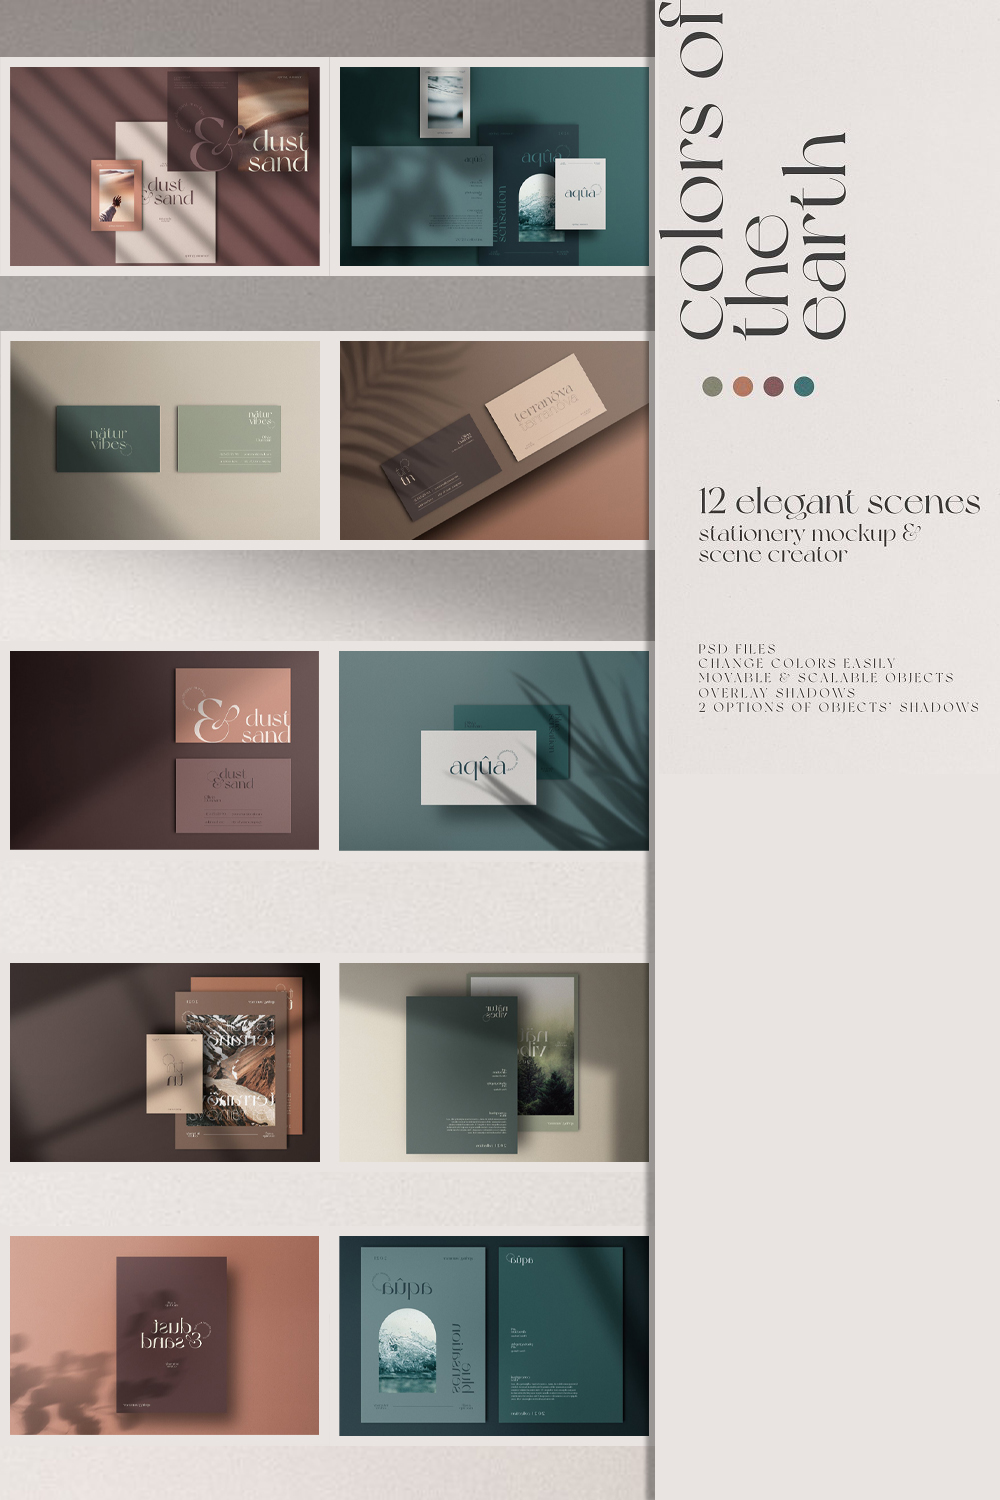 Colors of earth stationery mockup of pinterest.